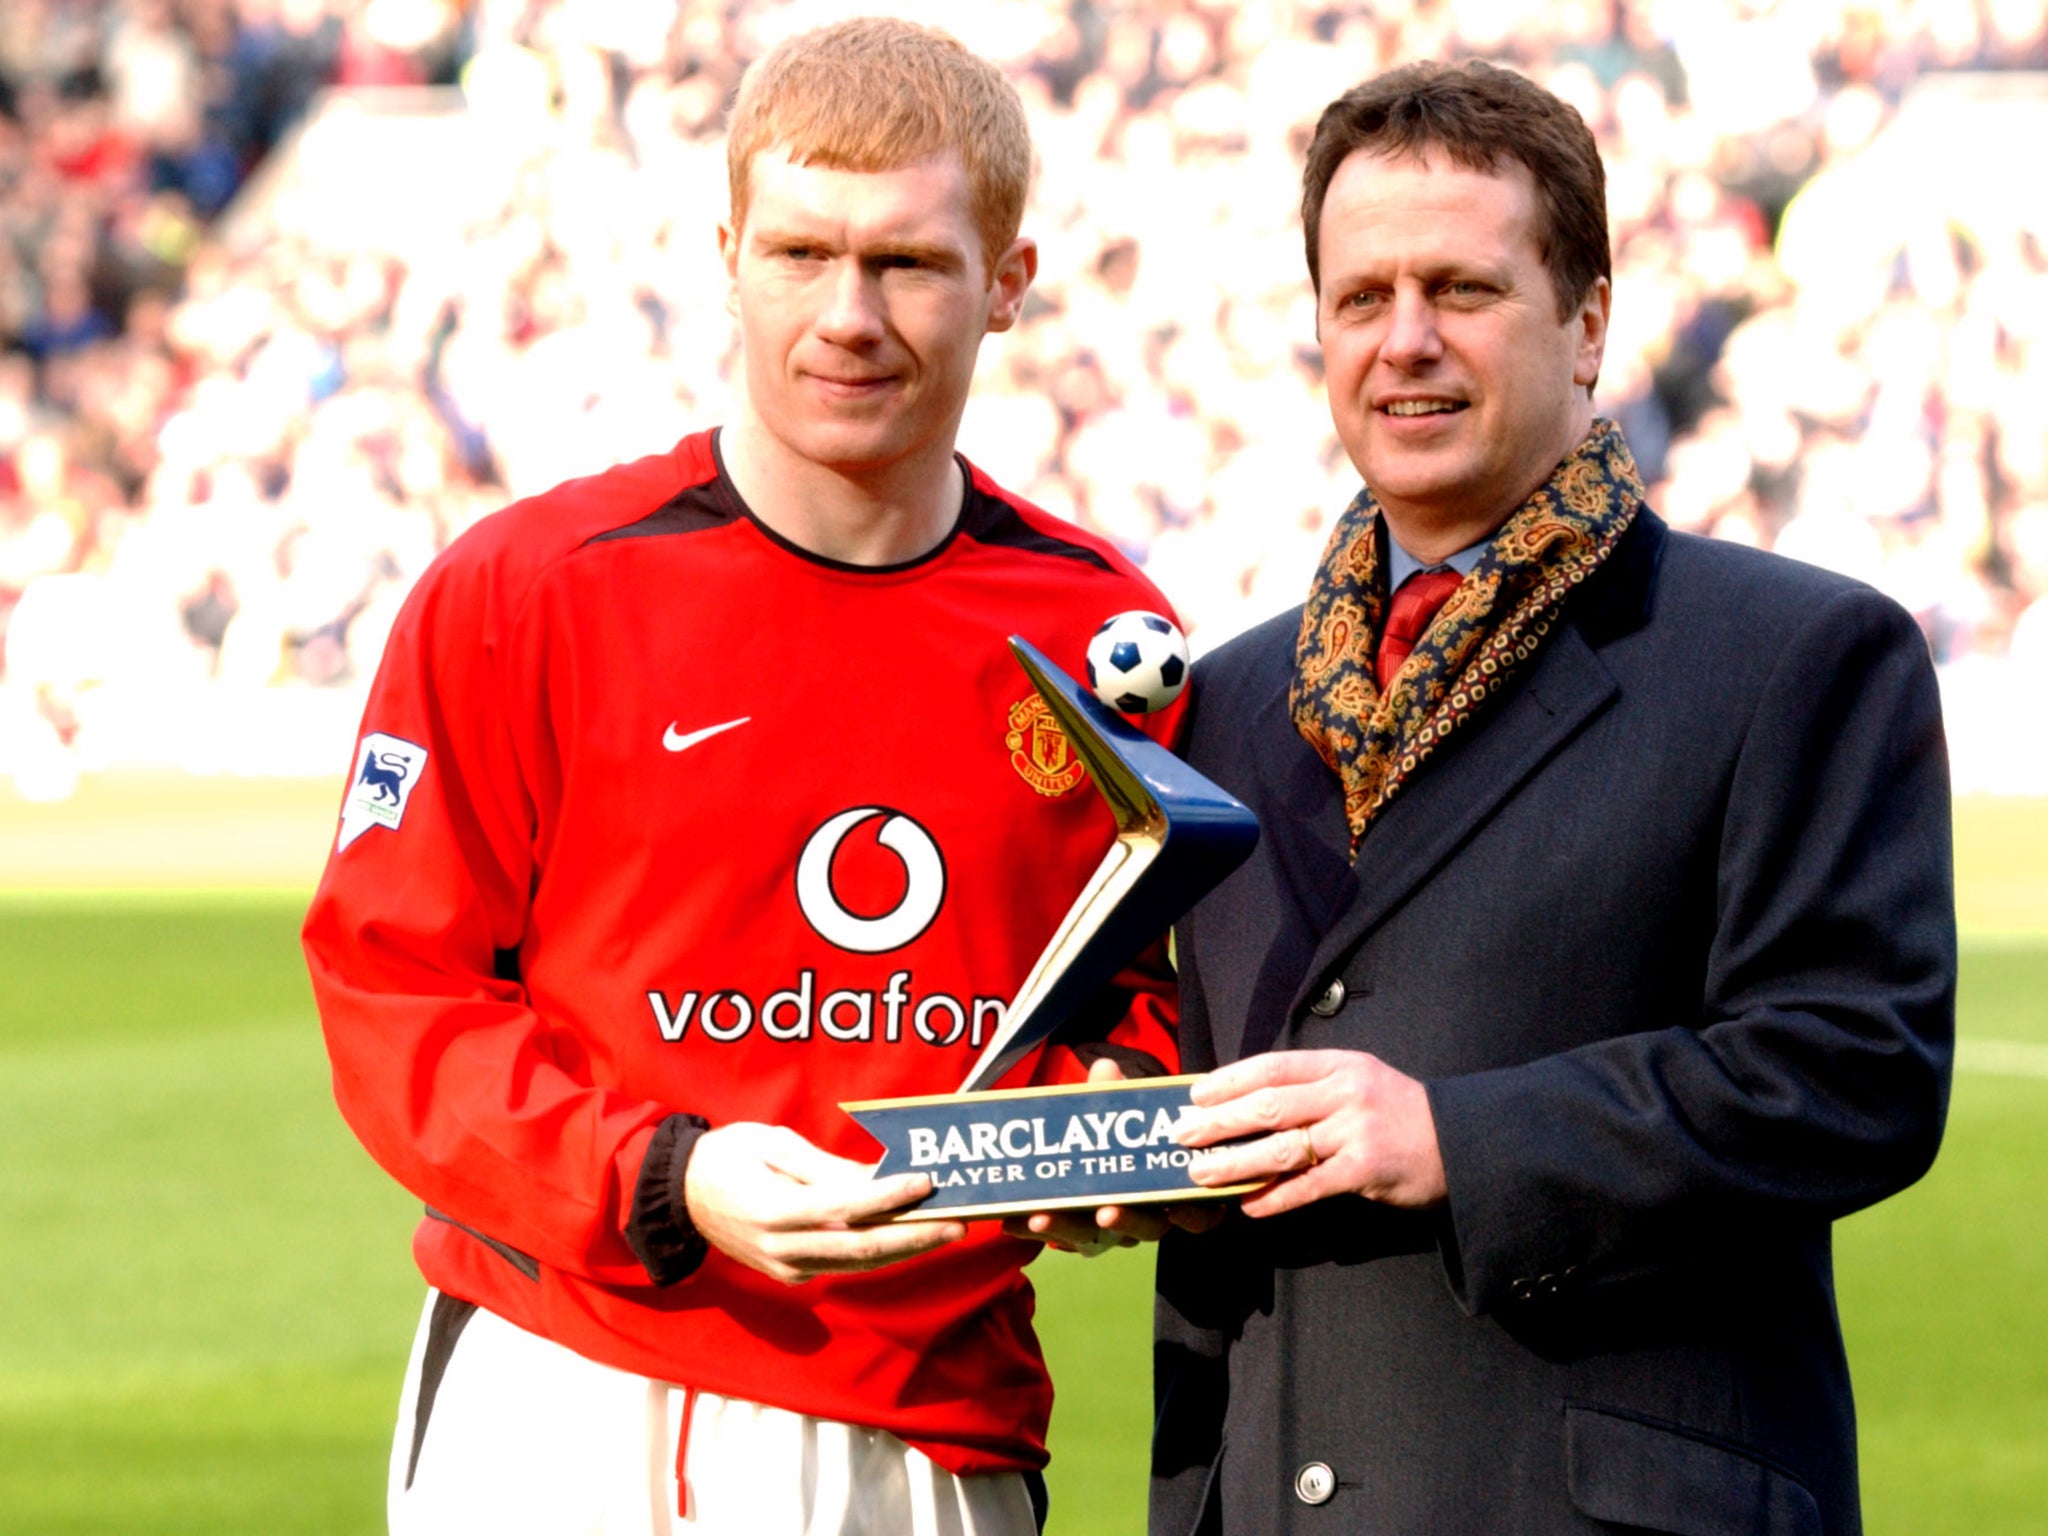 Paul Scholes receives a Barclaycard player of the month award in 2003